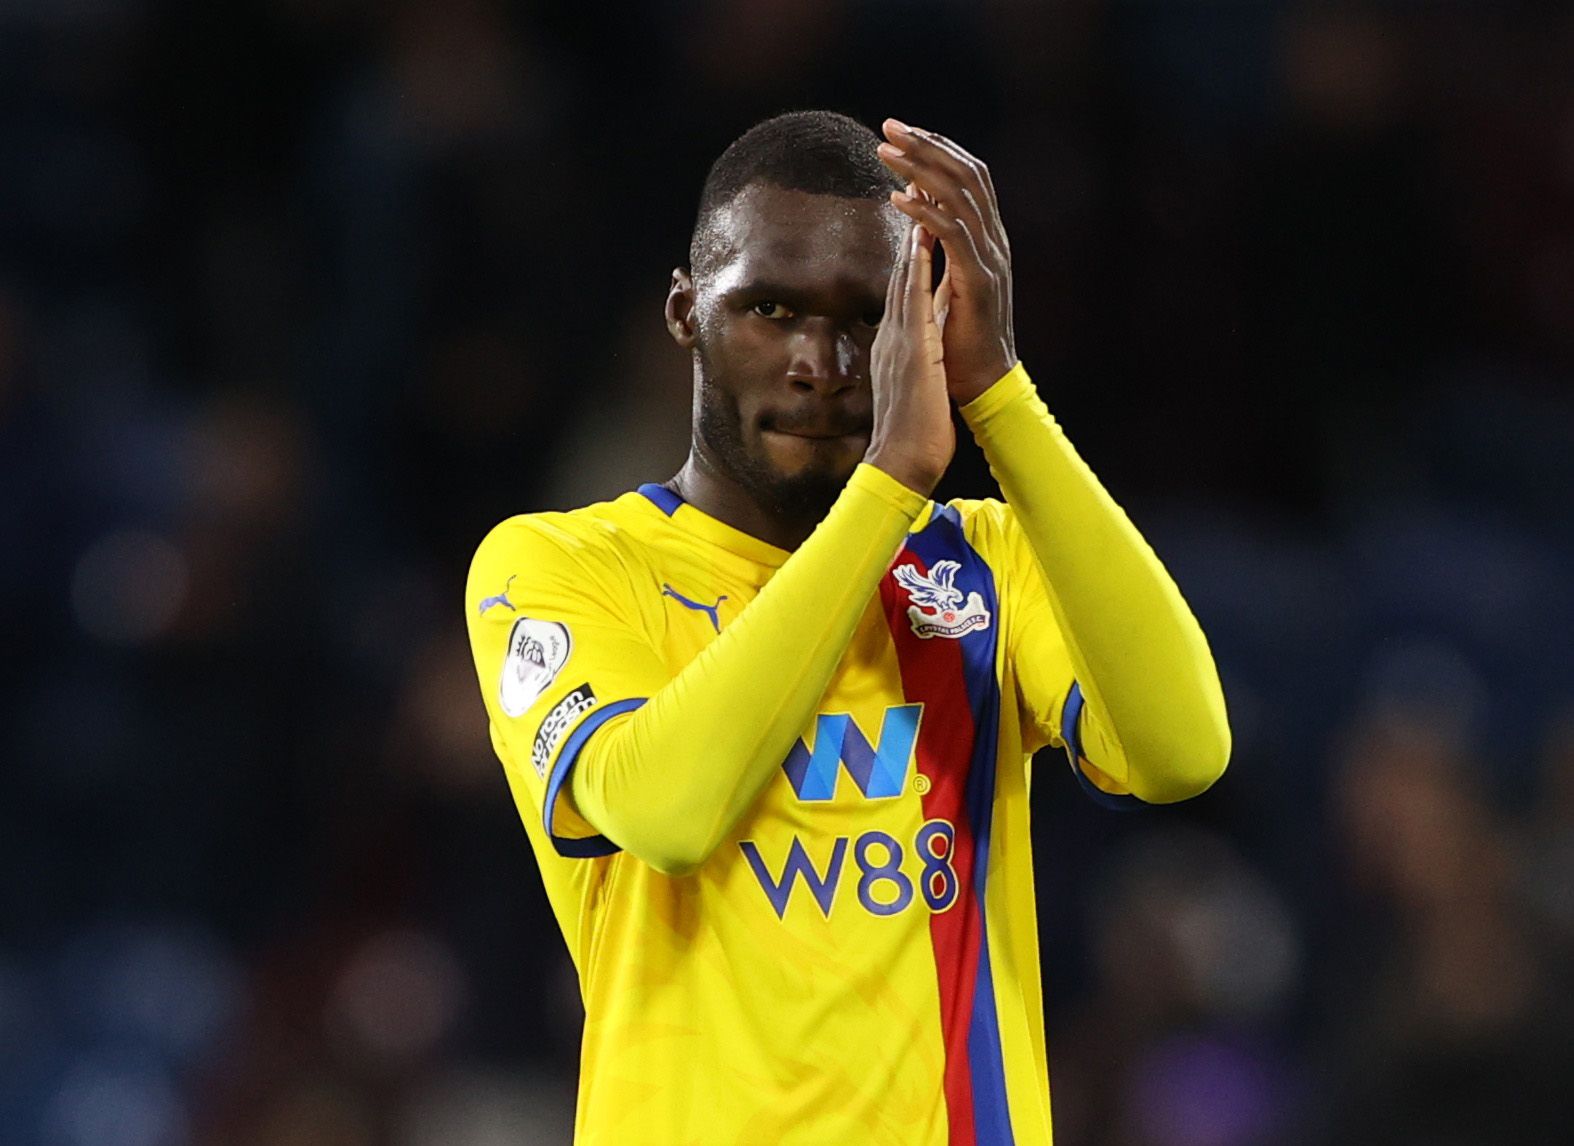 Soccer Football - Premier League - Burnley v Crystal Palace - Turf Moor, Burnley, Britain - November 20, 2021  Crystal Palace's Christian Benteke applauds the fans after the match Action Images via Reuters/Molly Darlington EDITORIAL USE ONLY. No use with unauthorized audio, video, data, fixture lists, club/league logos or 'live' services. Online in-match use limited to 75 images, no video emulation. No use in betting, games or single club /league/player publications.  Please contact your account